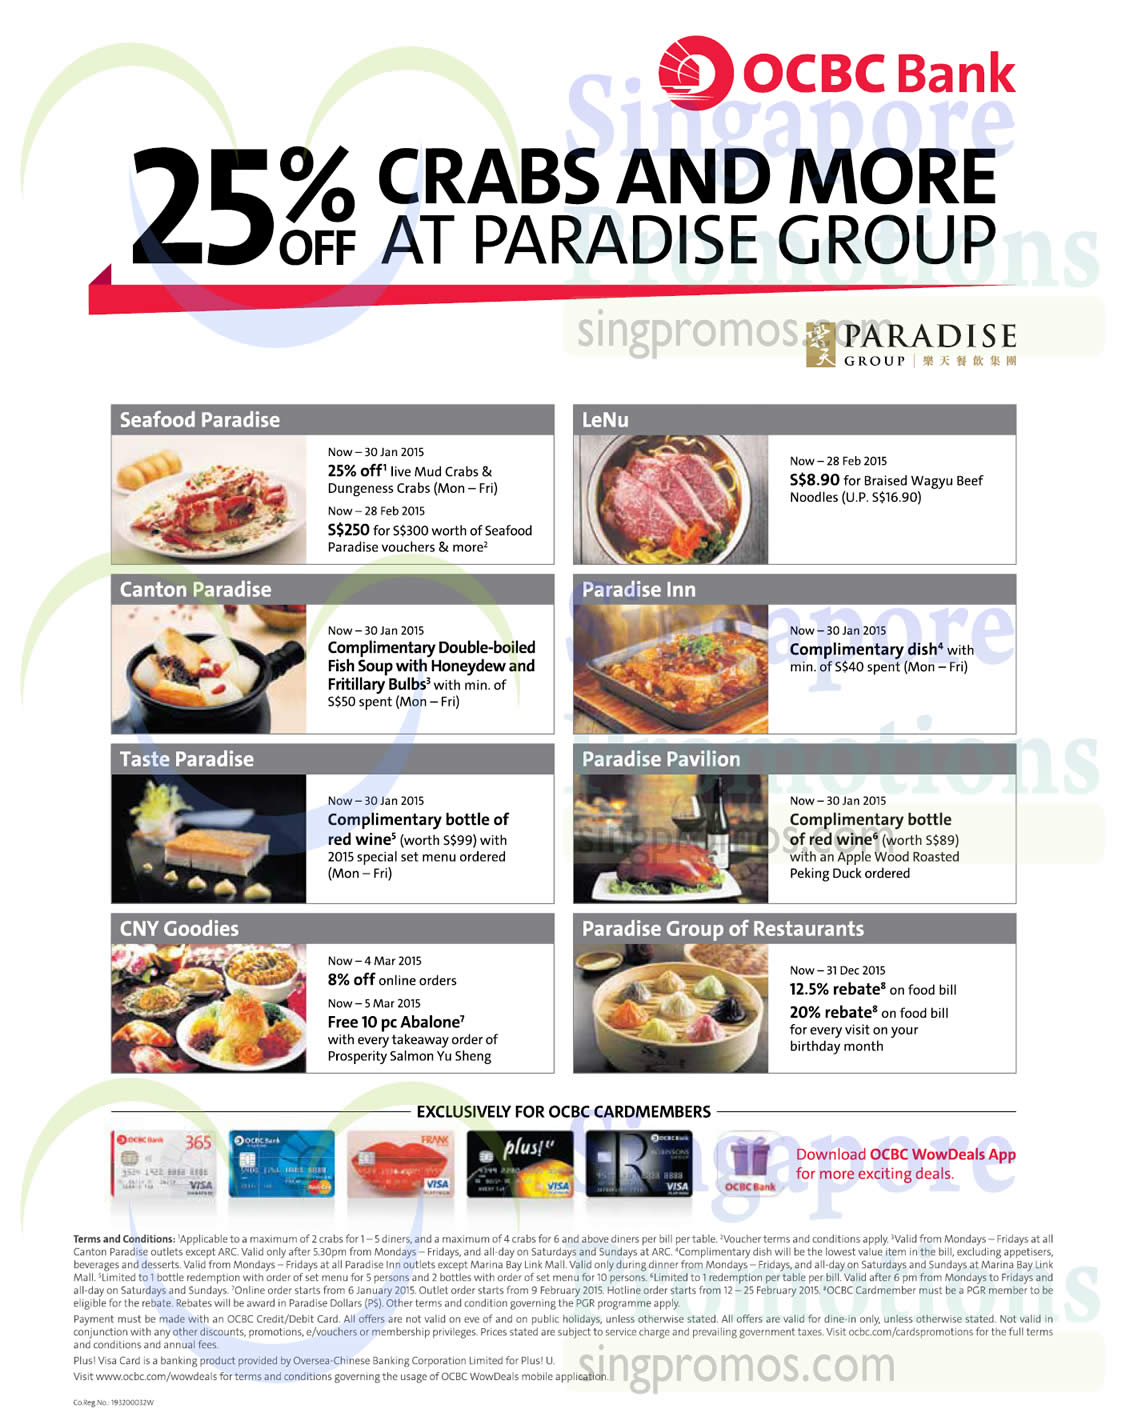 Featured image for Seafood Paradise 25% Off Crabs & More For OCBC Cardmembers 13 Jan - 28 Feb 2015